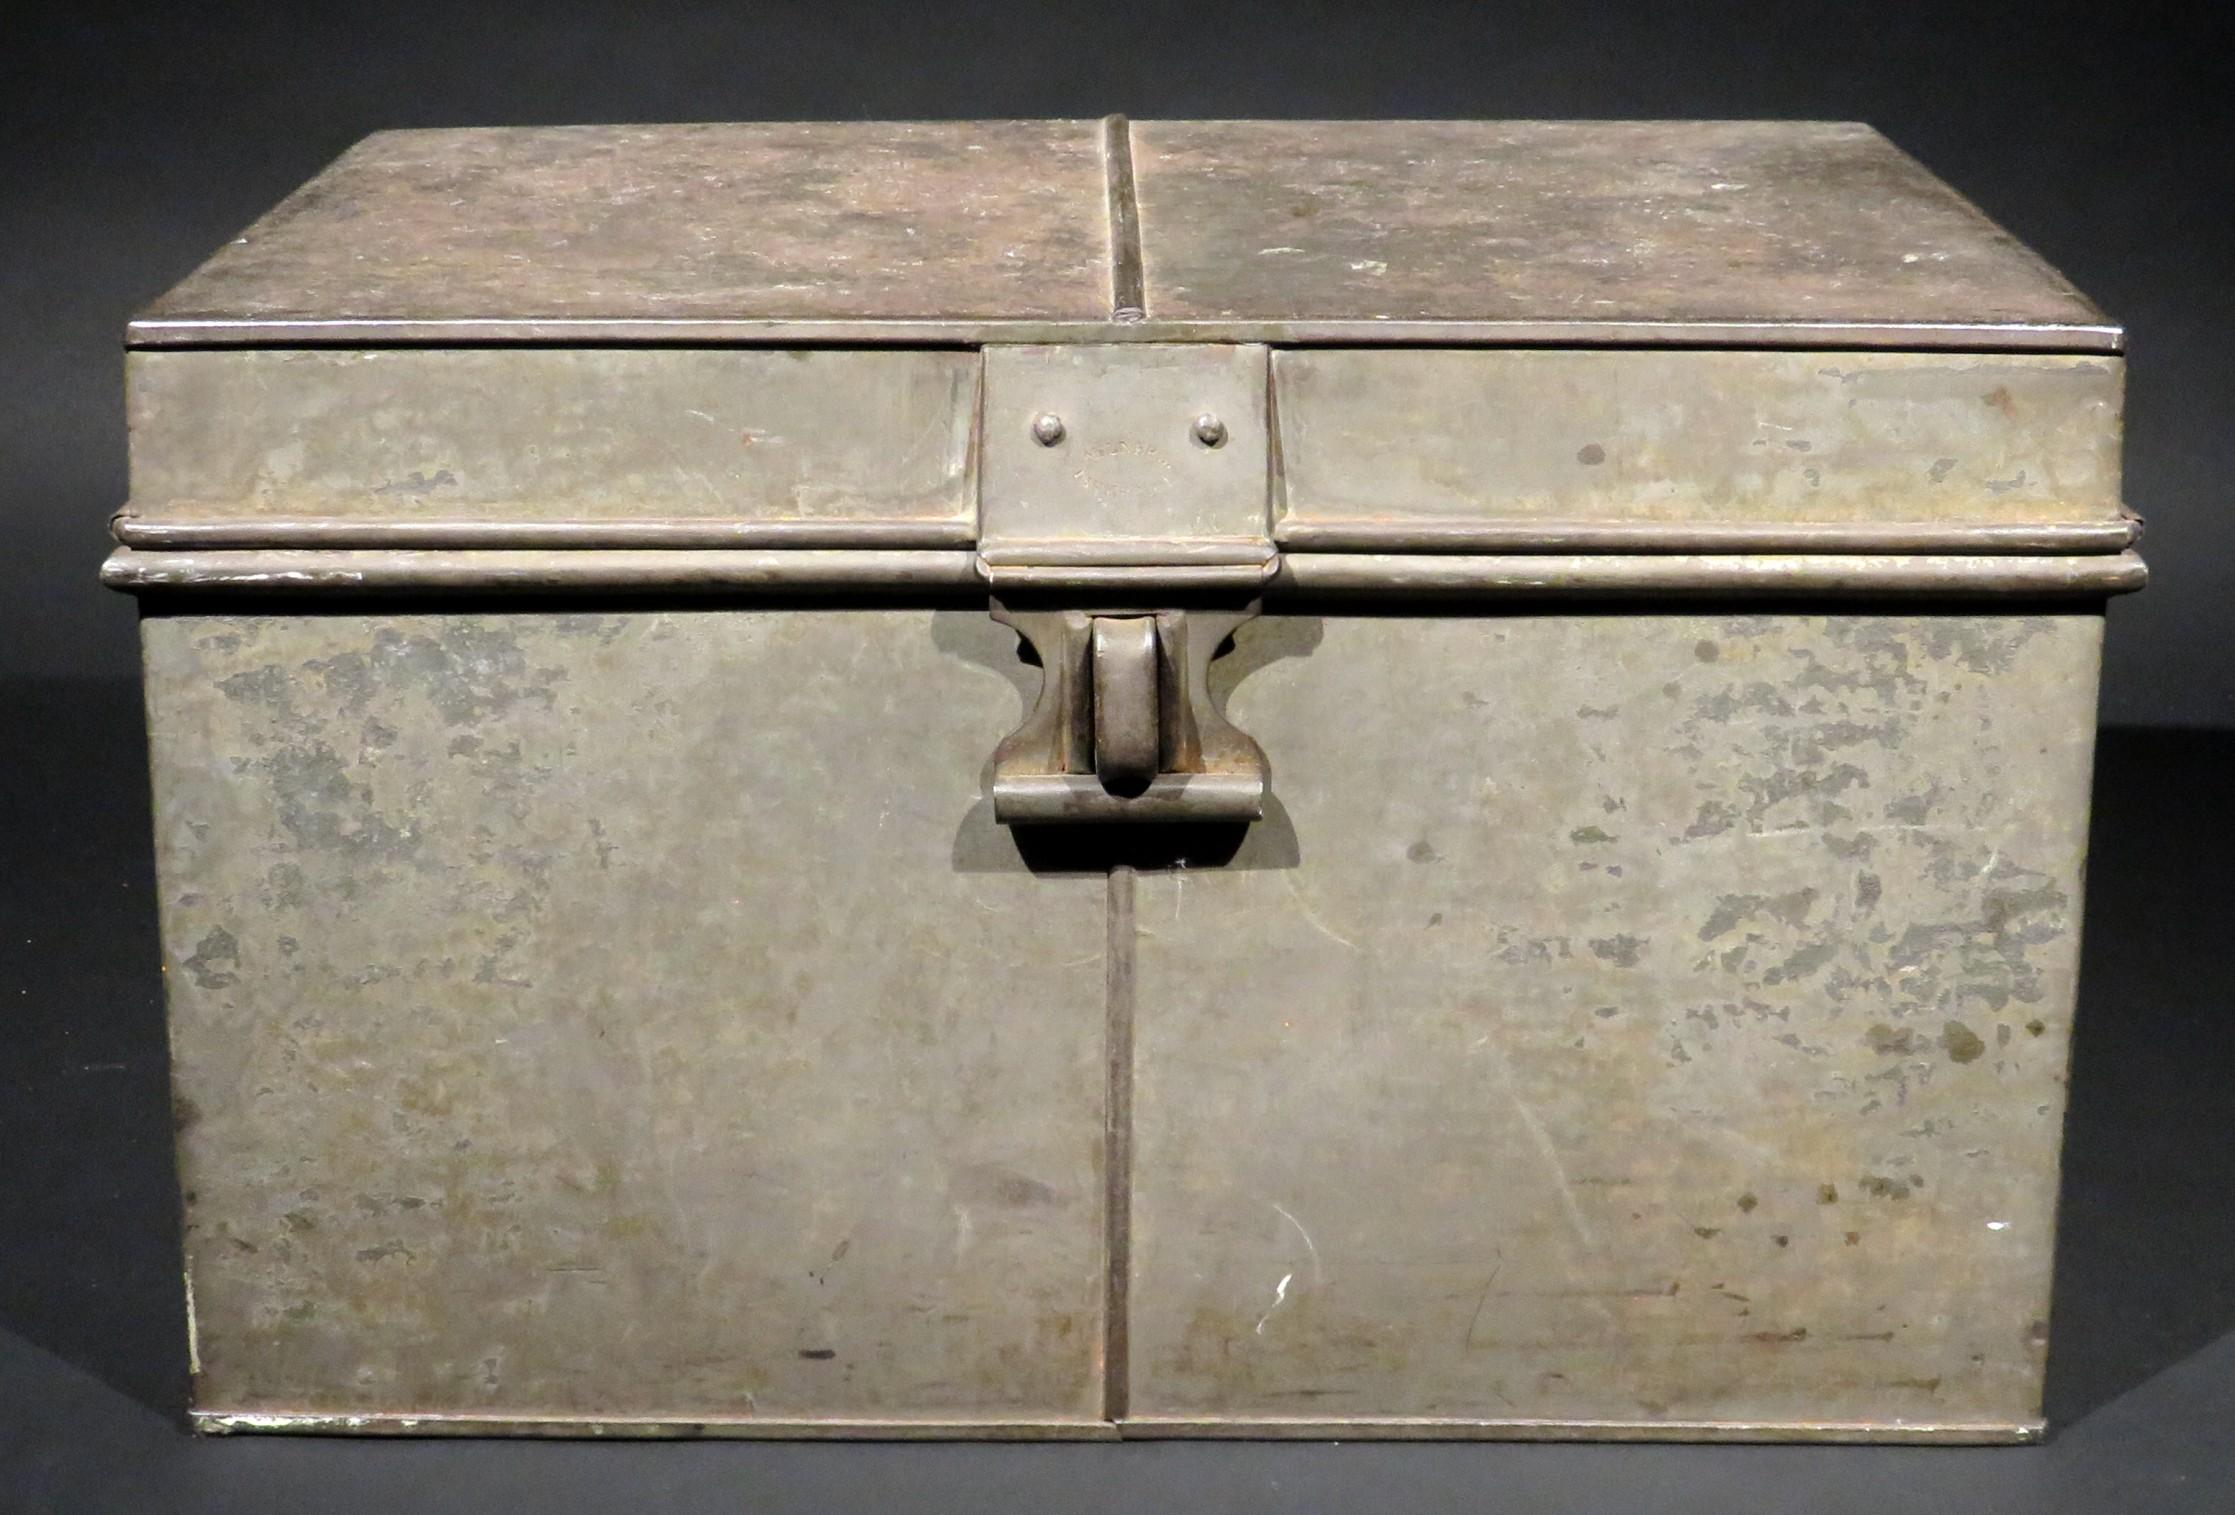 An original Thomas Milner sheet iron safety box / deed box, ruggedly constructed of sheet iron with soldered seams & fitted with twin hinged carrying handles and a hinged lid, the lids clasp bearing stamped manufacturers marks, the underside of the